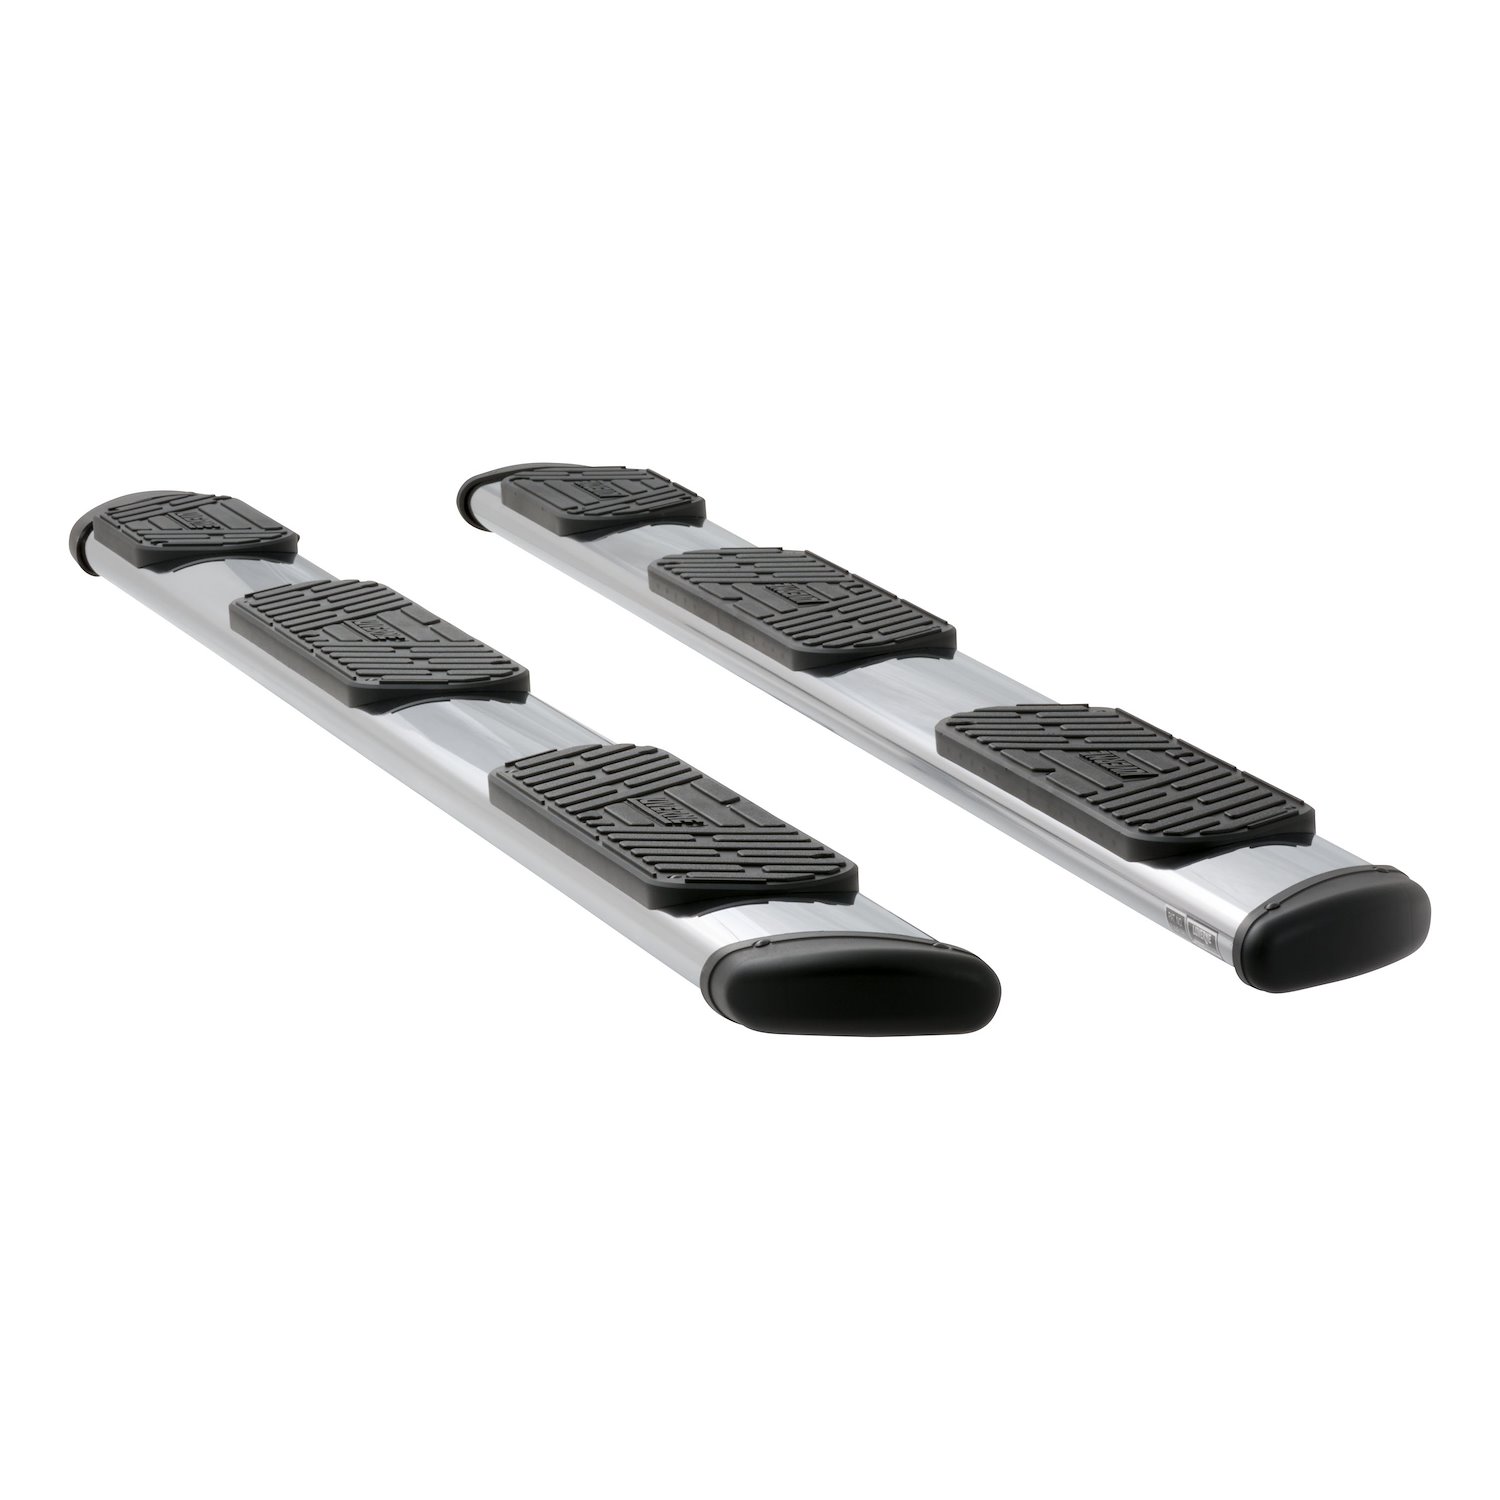 477108-401530 Regal 7 Polished Stainless 108 in. Oval W2W Steps Fits Select Ford F-150 Crew, 6'6 in. Bed